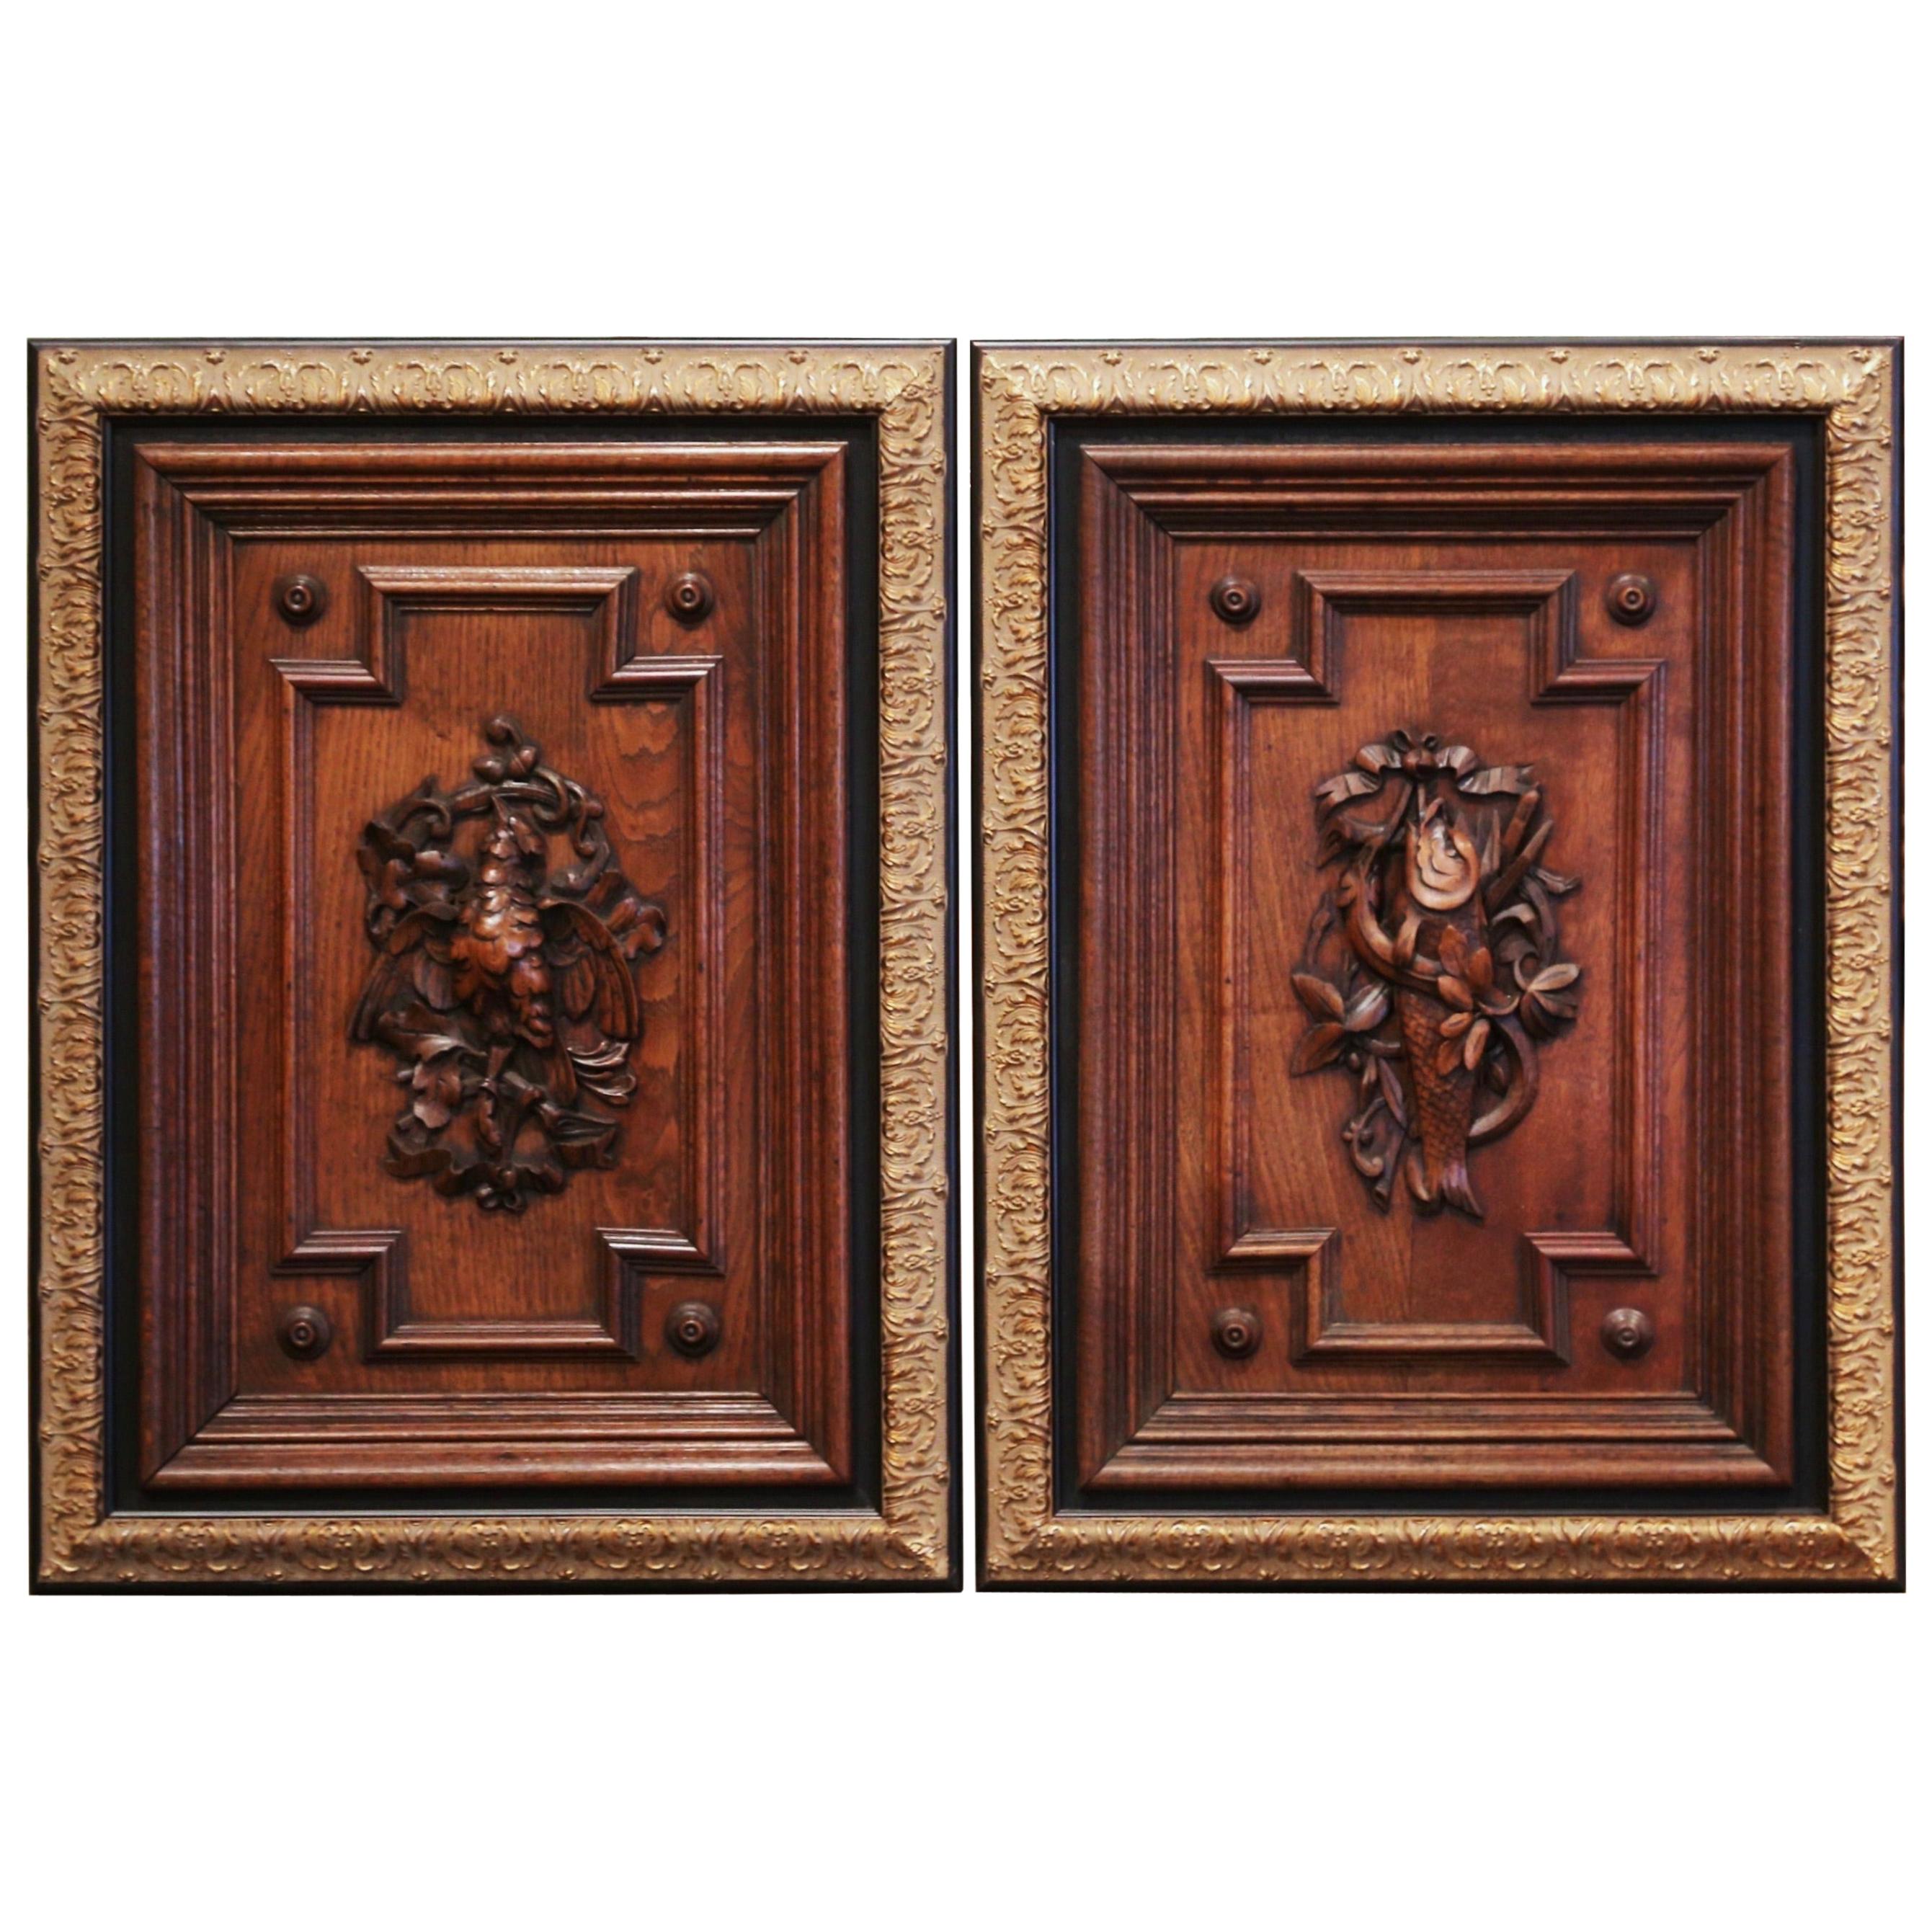 Pair of 19th Century French Carved Oak Wall Door Panels in Gilt Frames